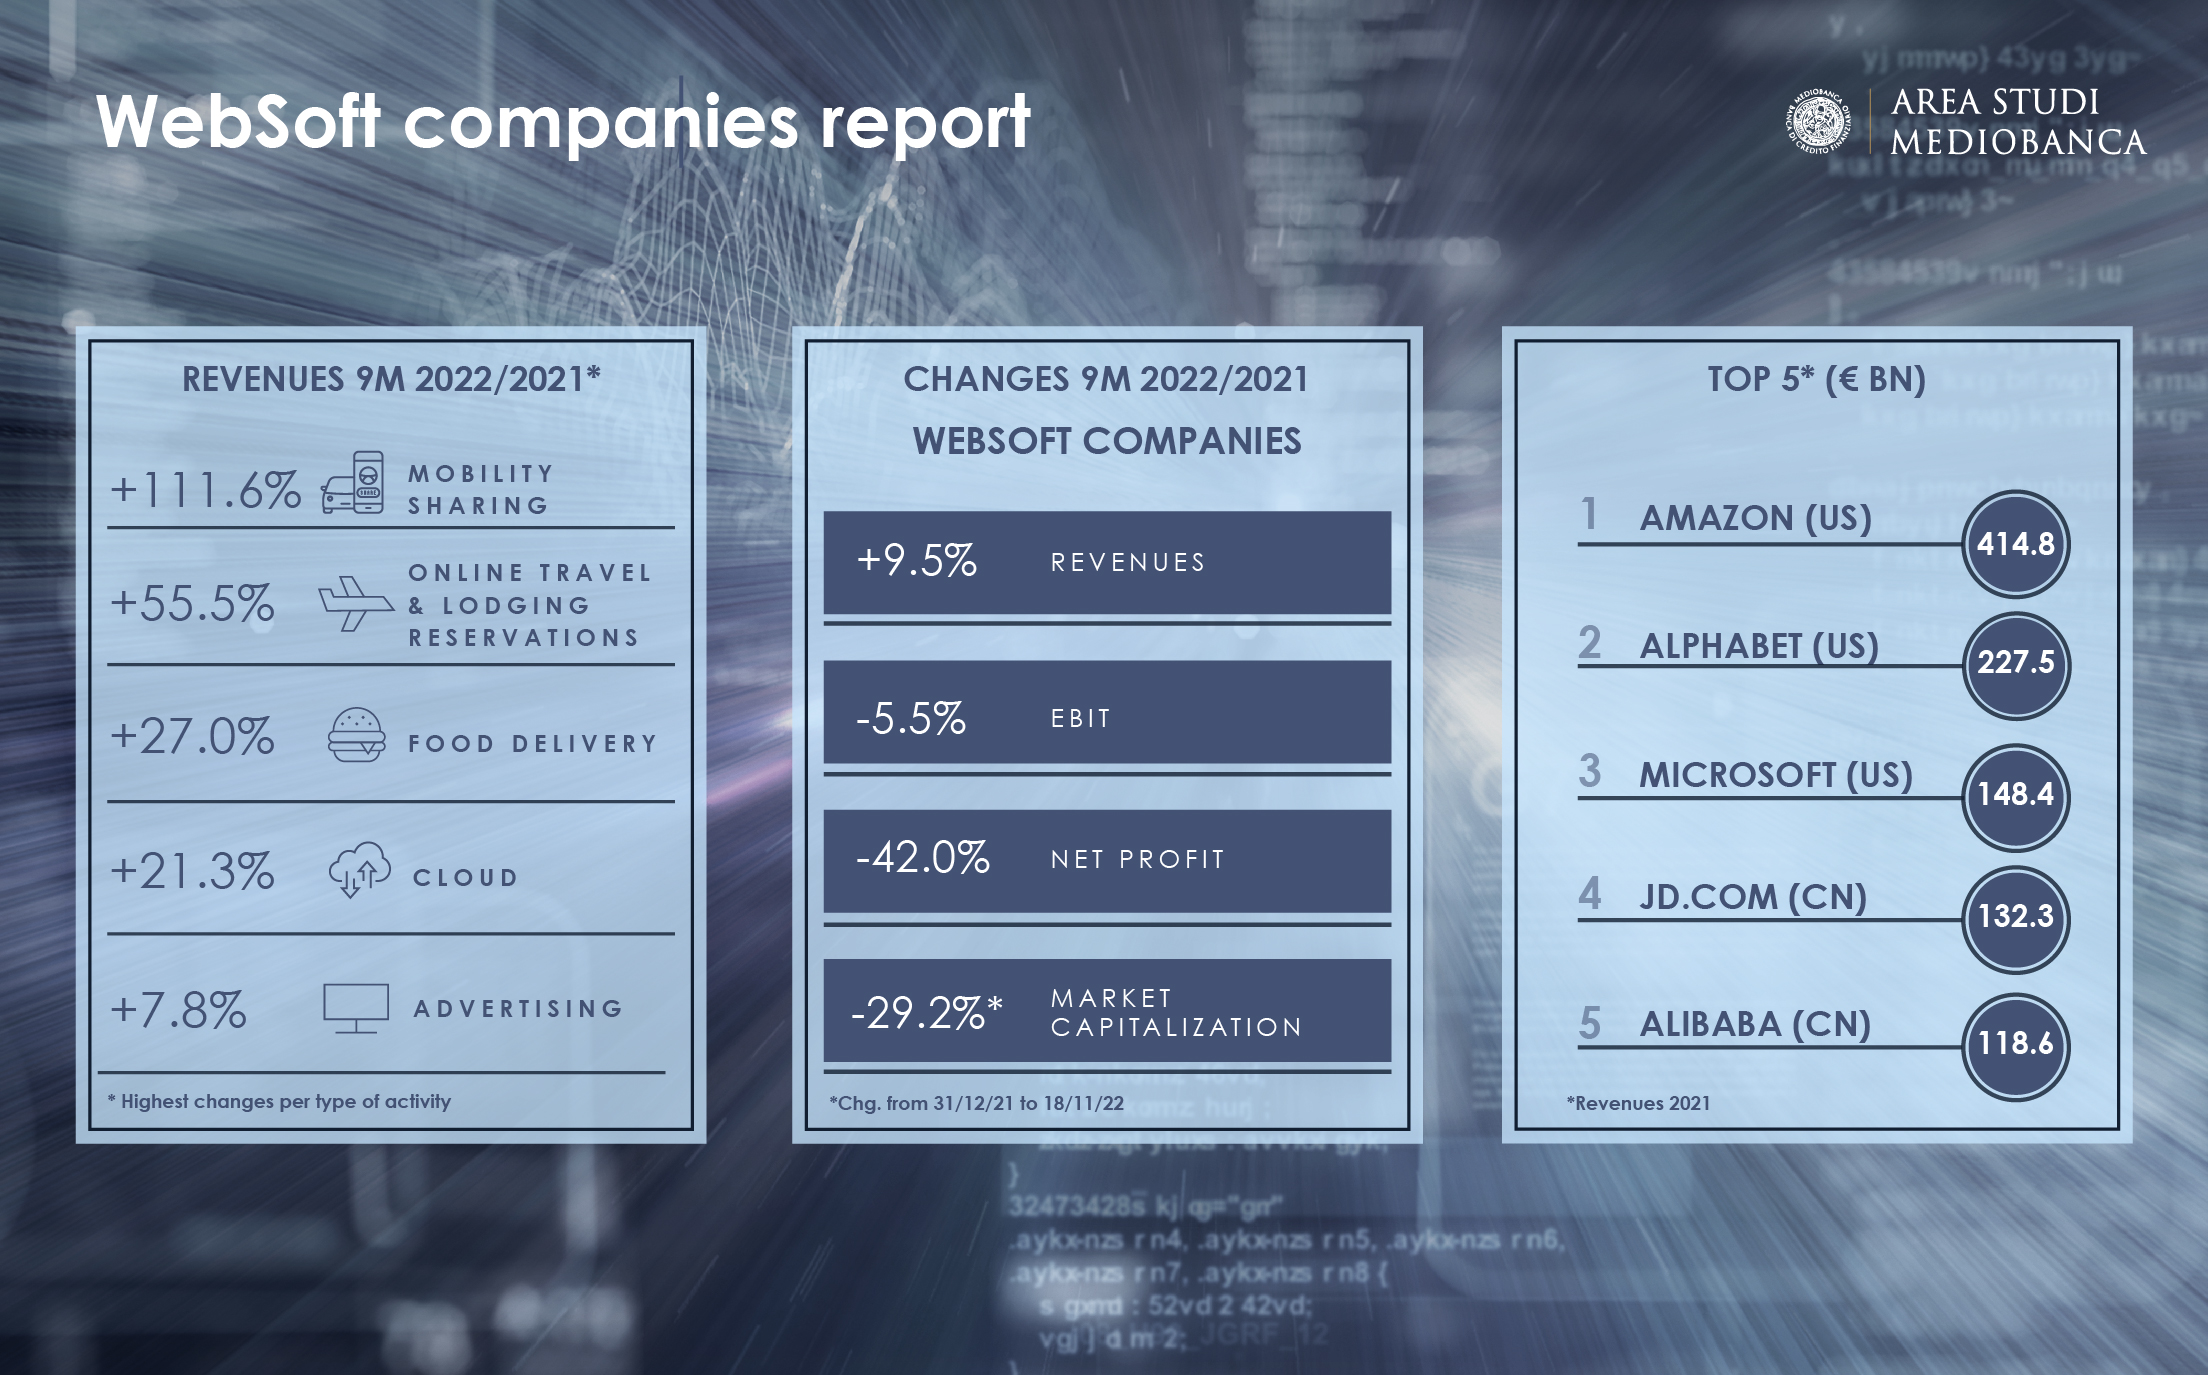 Image for The Mediobanca Research Area has today presented its annual report on the world’s largest software and web companies 